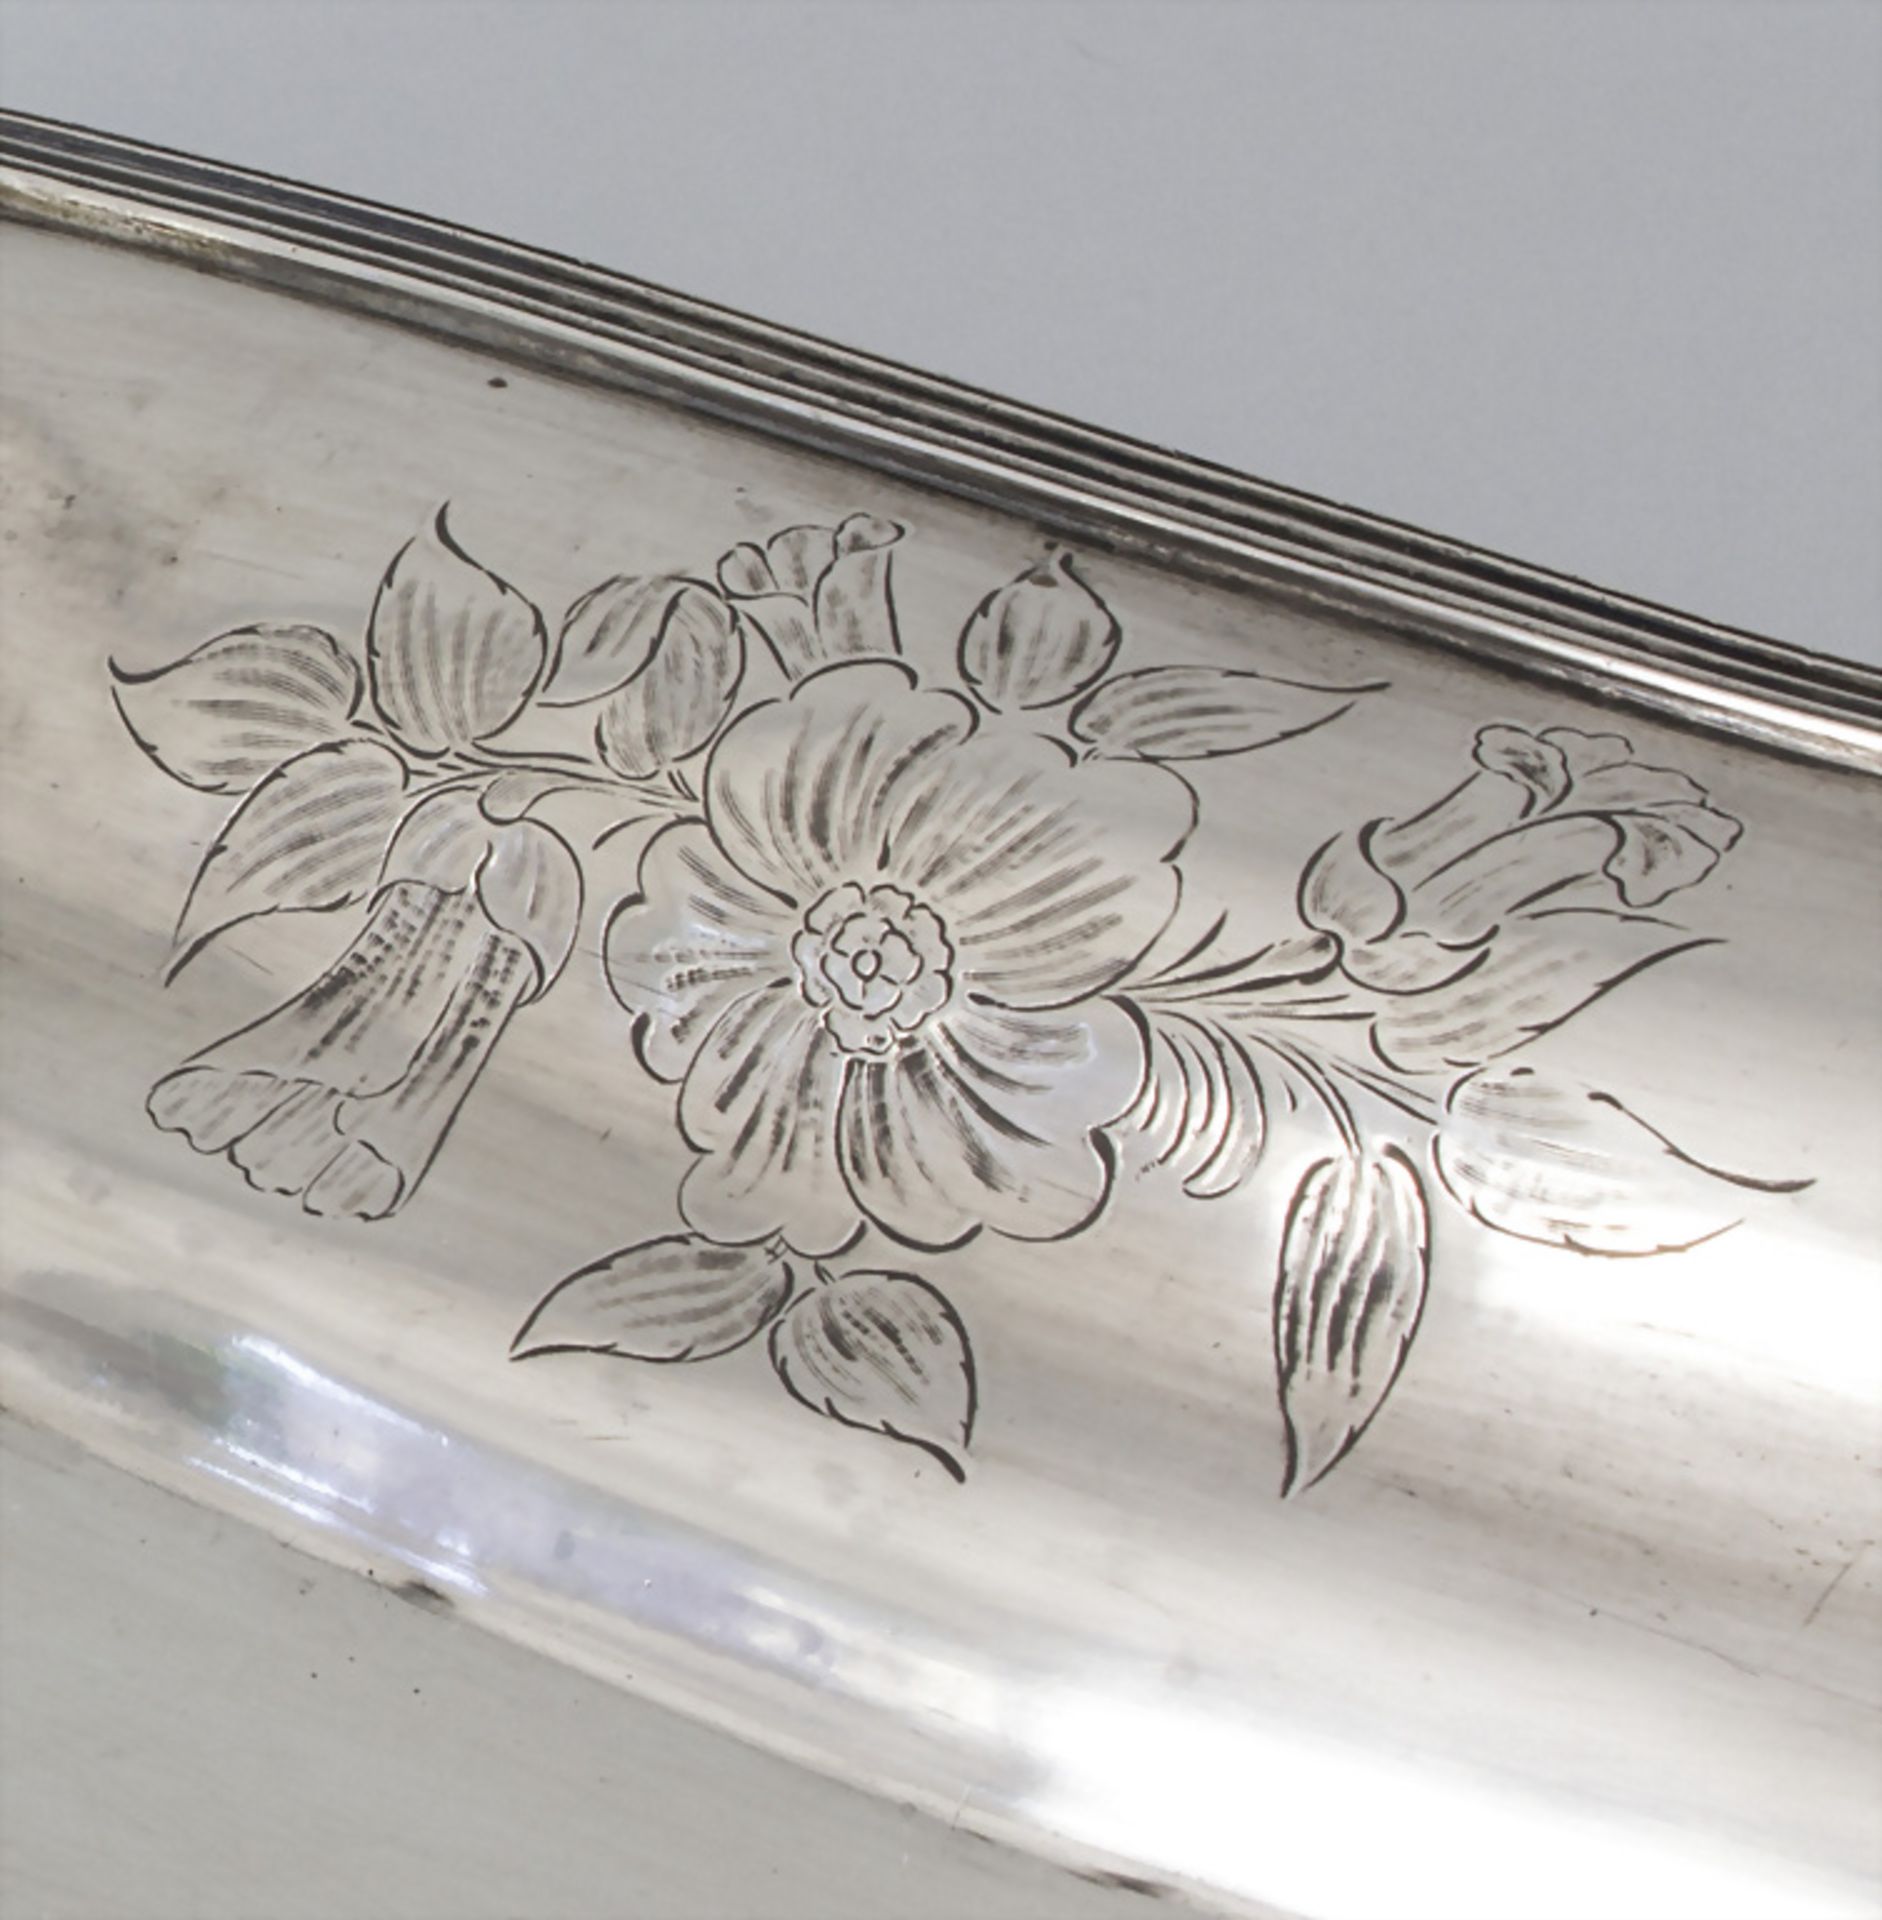 Prunk-Tablett / A large silver tray, Galtes, Barcelona, 19. Jh. - Image 5 of 9